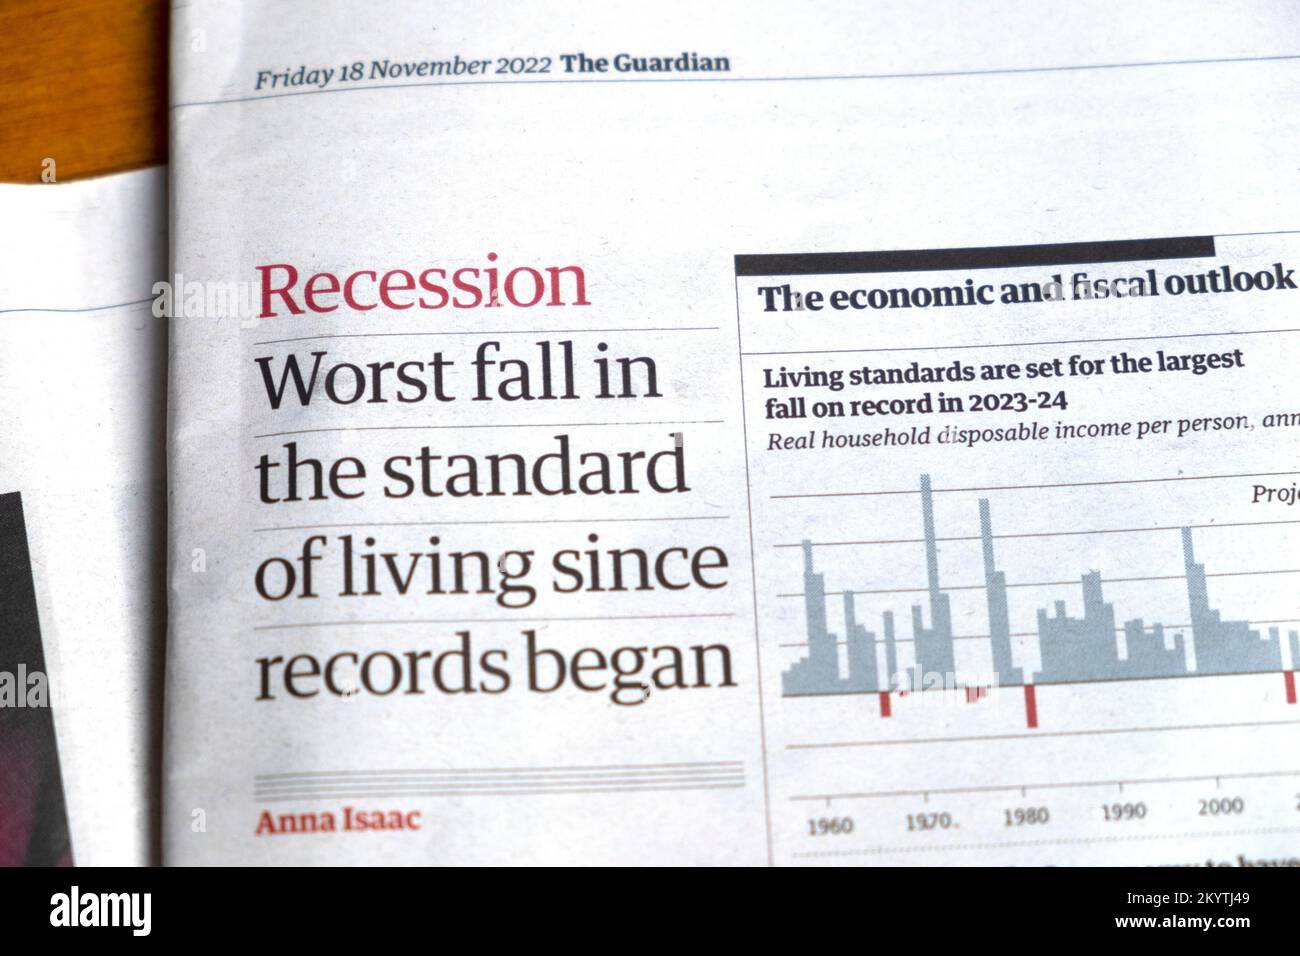 'Recession Worst fail in the standard of living since records began' Guardian newspaper headline British economy clipping 18 November 2022 London UK Stock Photo